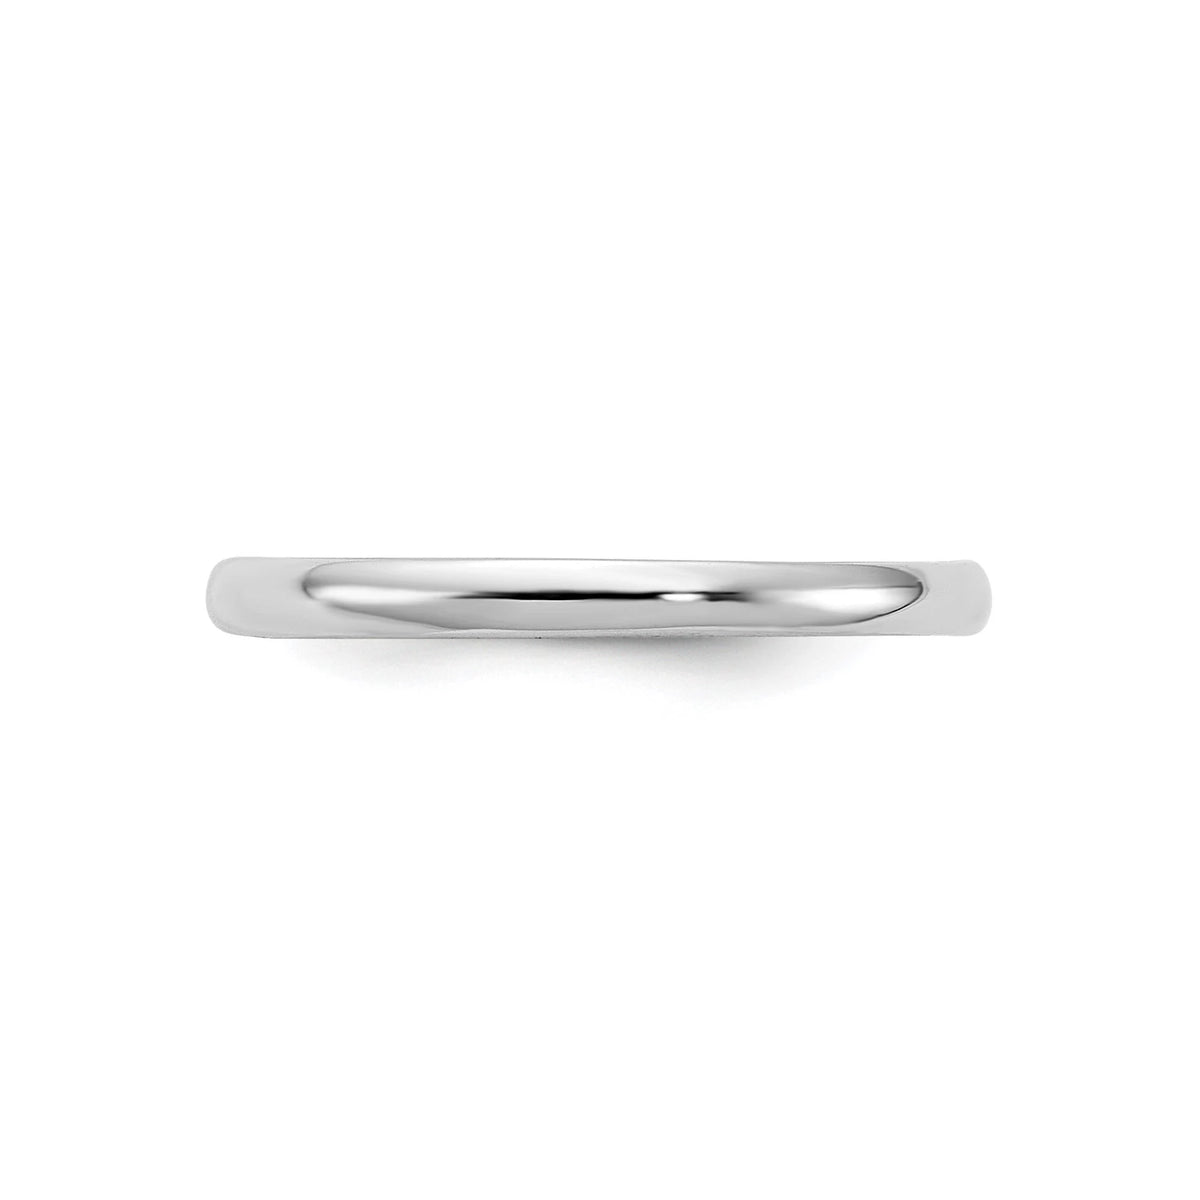 14k White Gold Baby Ring / Band Size 3 Toddler Size 1mm Band - Gift Box Included